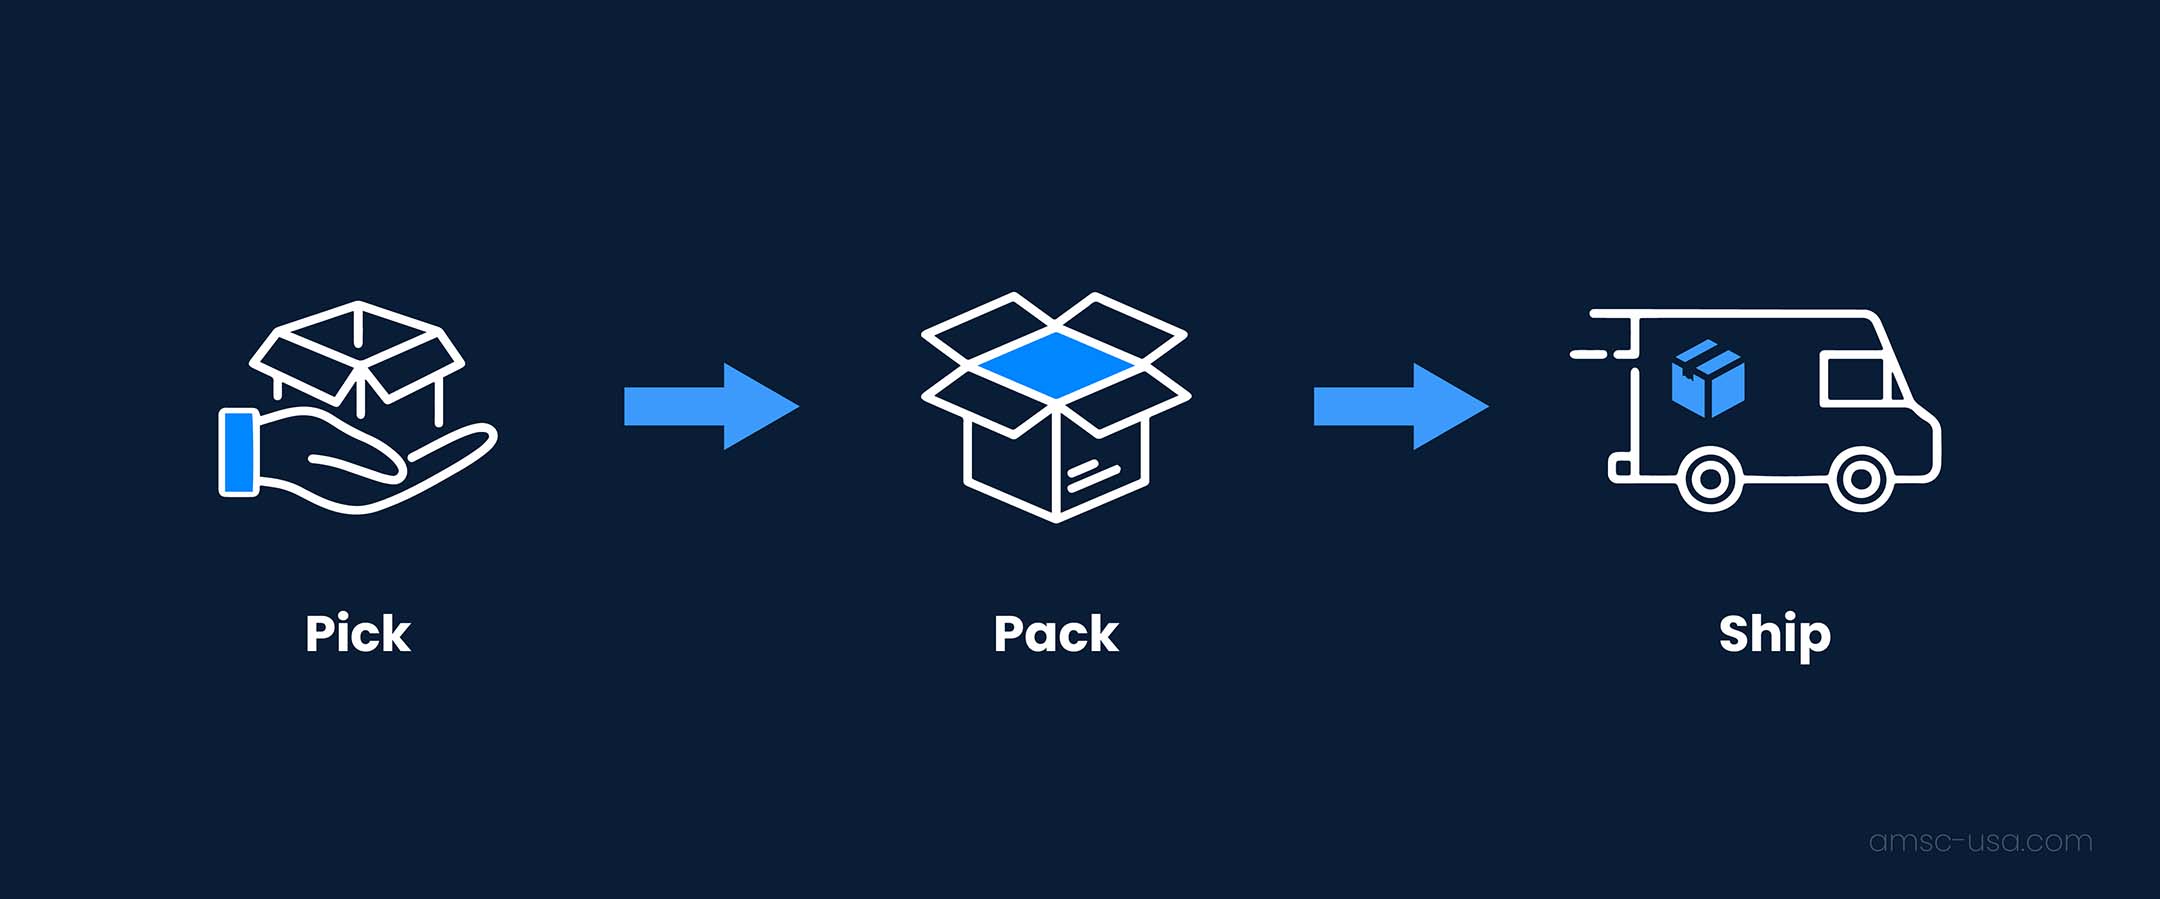 Icons showing the pick pack and ship process